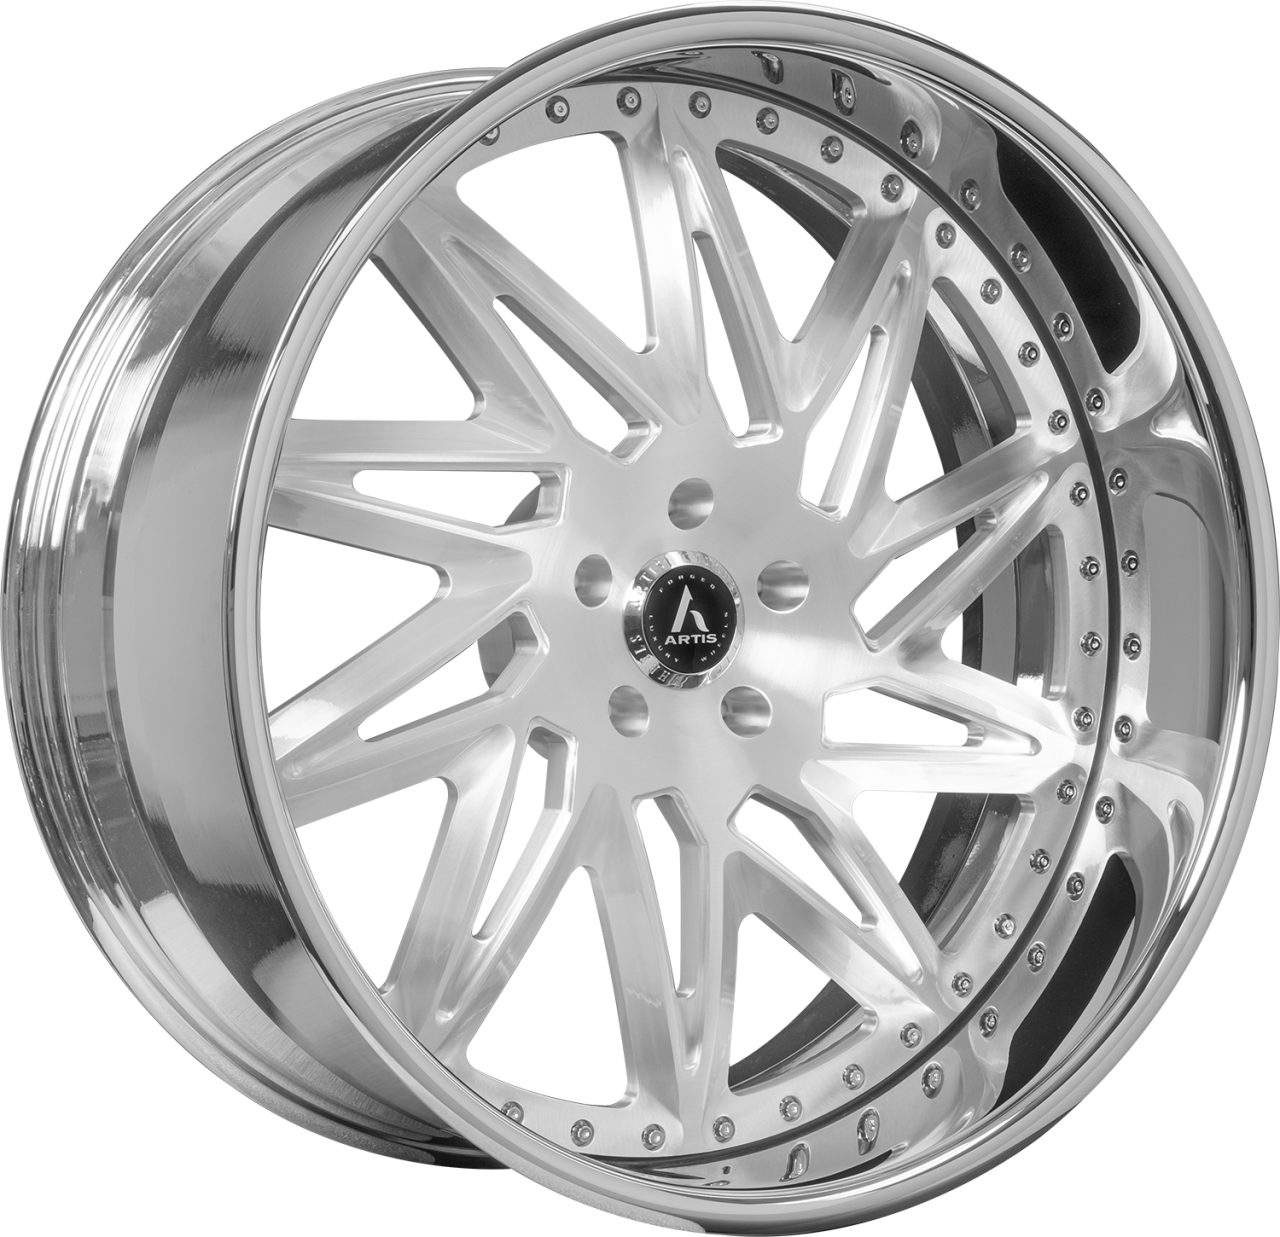 Artis Forged Slidell wheel with Brushed finish